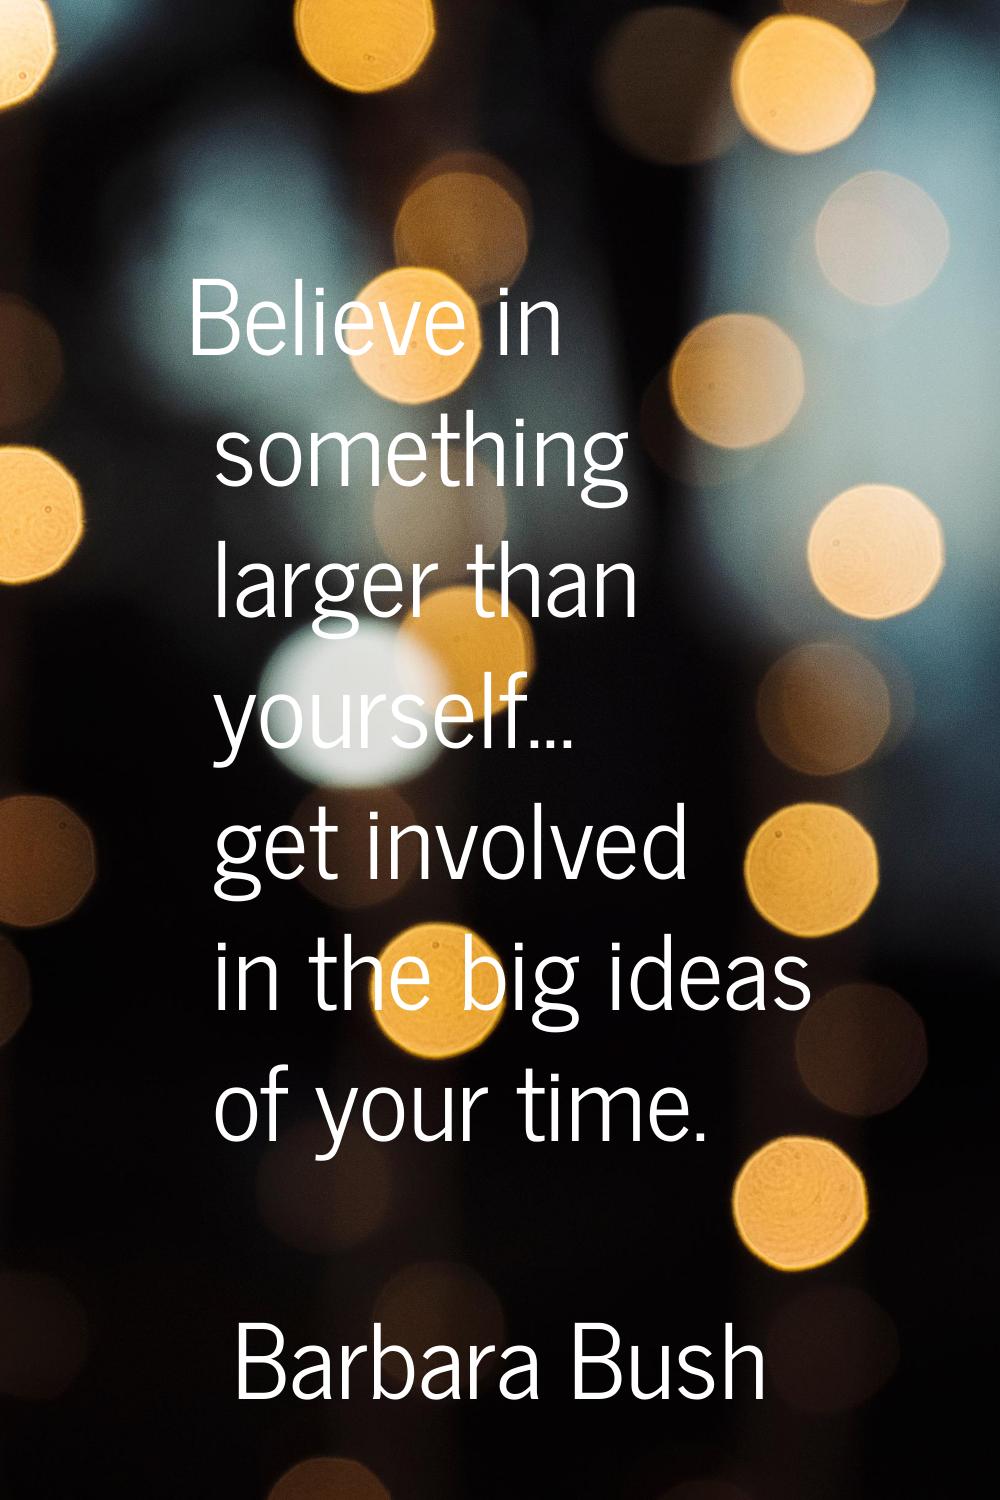 Believe in something larger than yourself... get involved in the big ideas of your time.